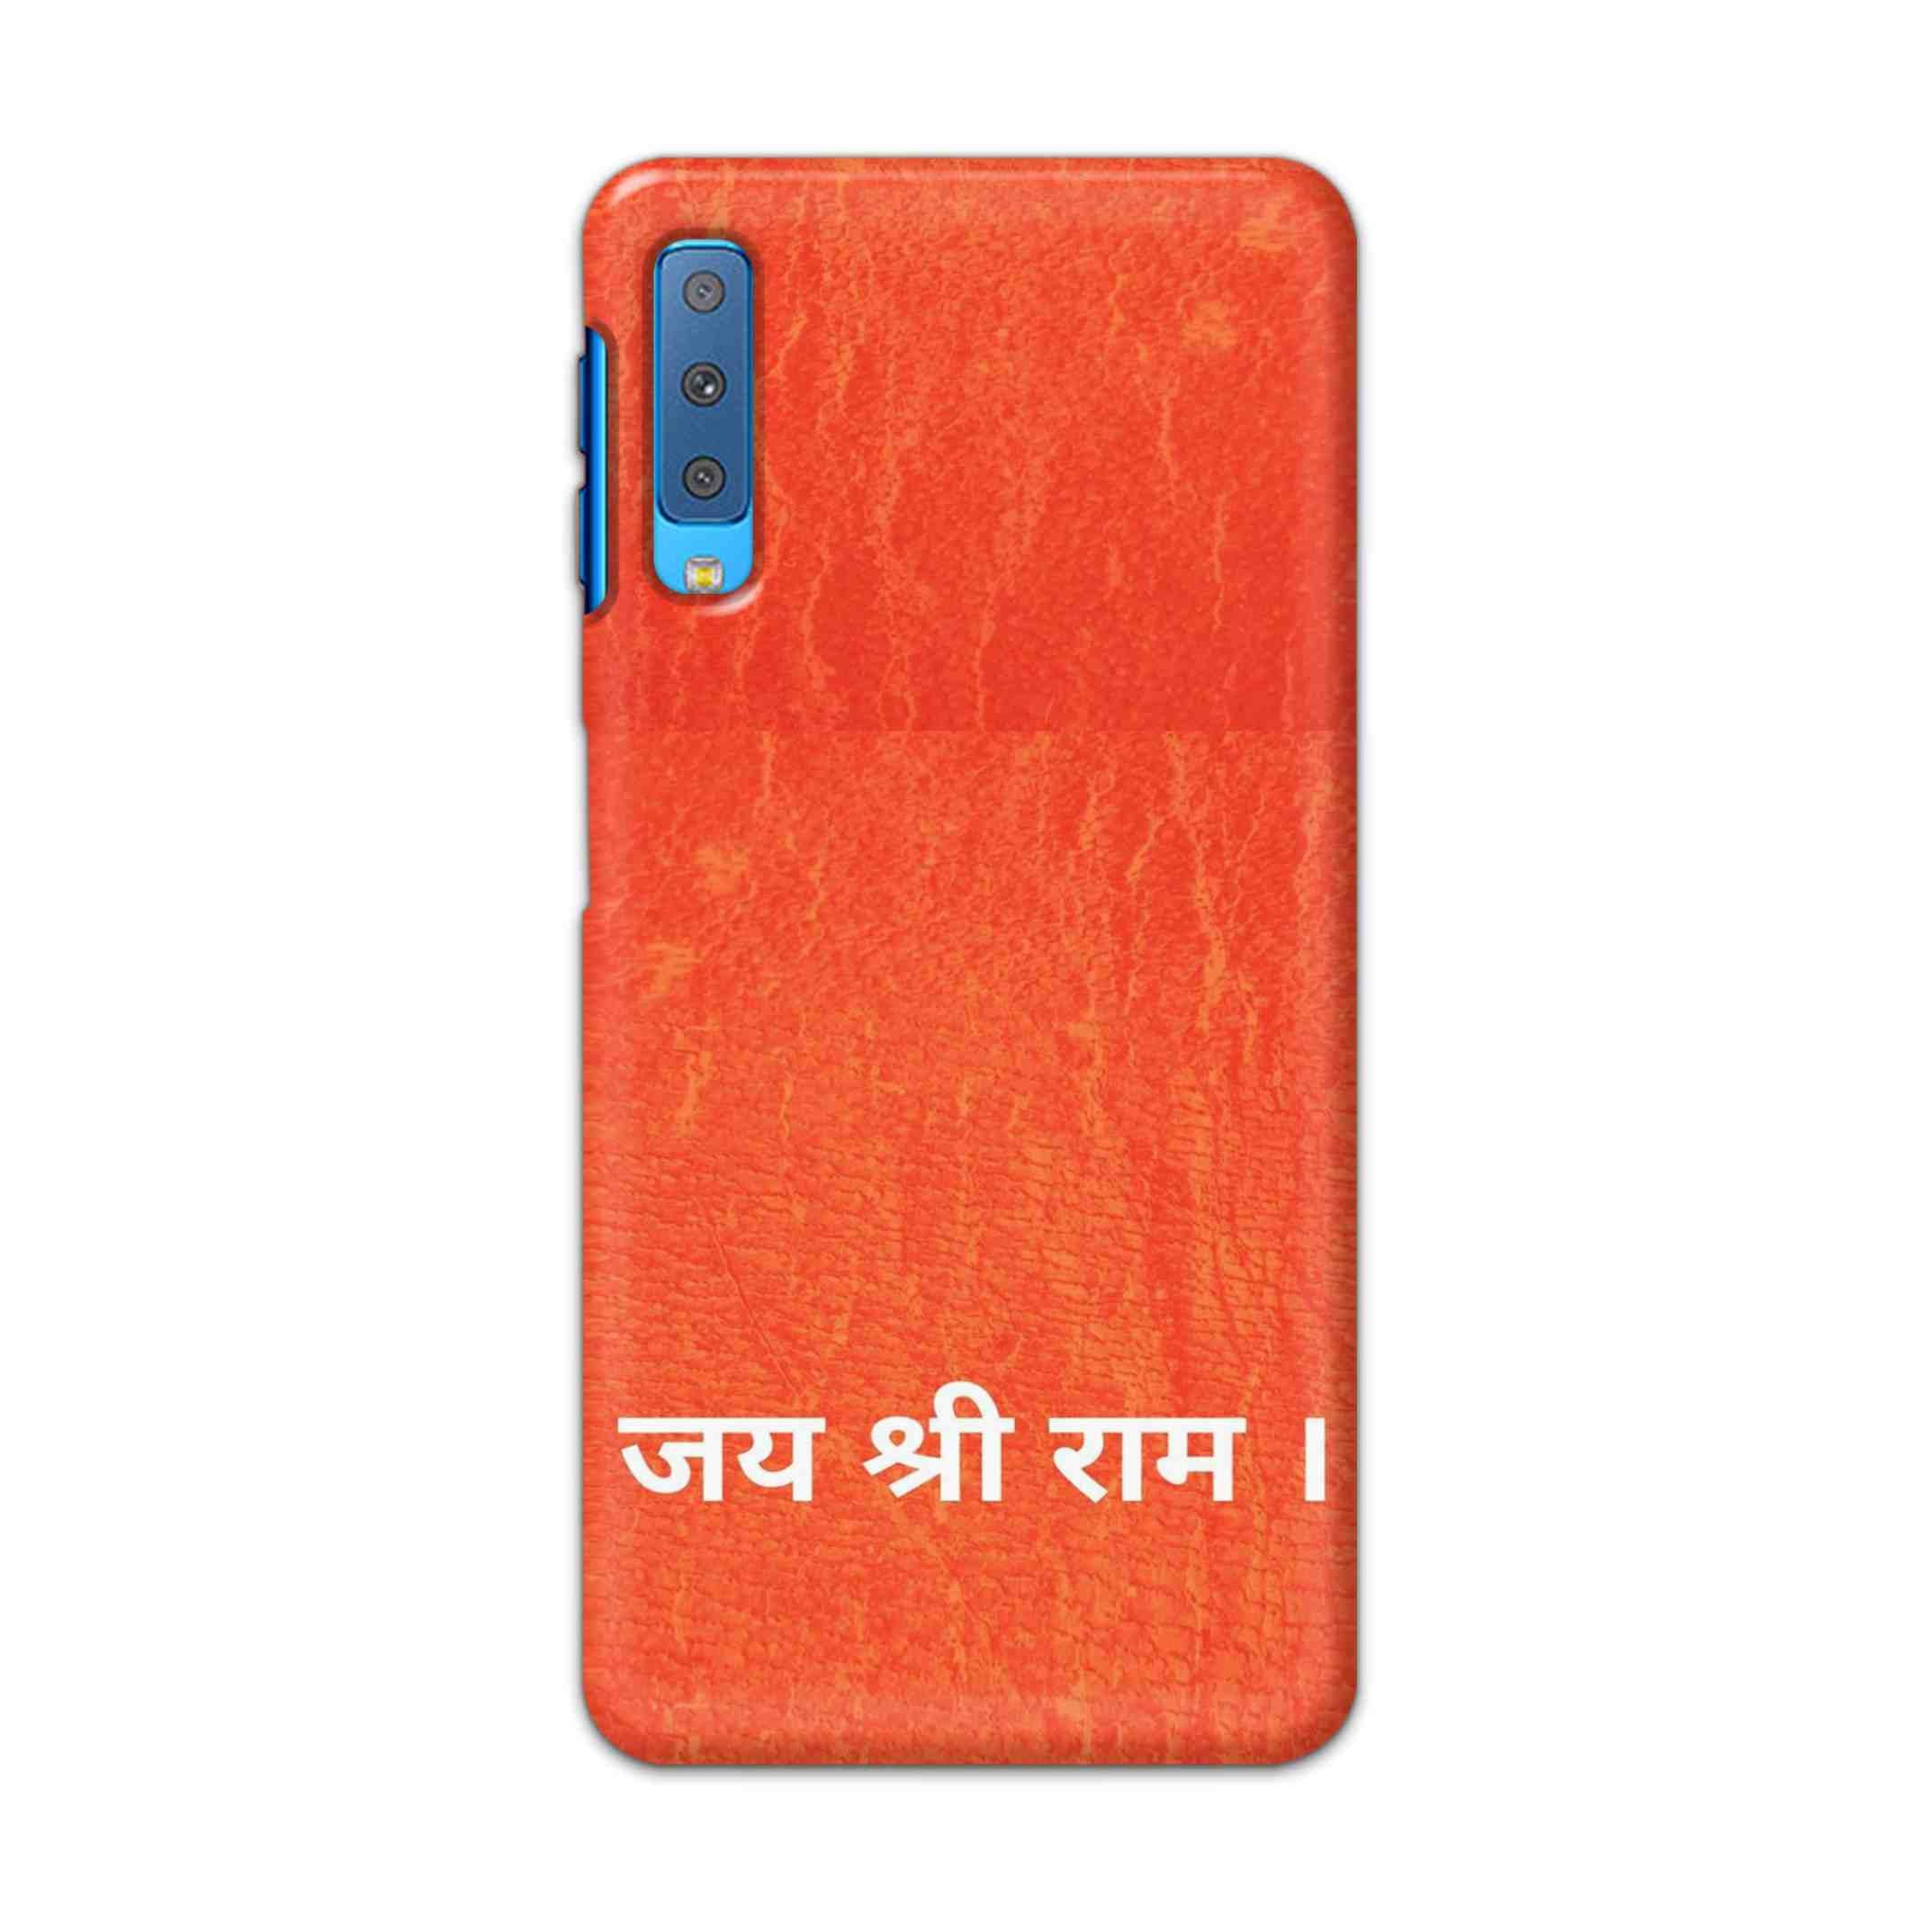 Buy Jai Shree Ram Hard Back Mobile Phone Case Cover For Samsung Galaxy A7 2018 Online